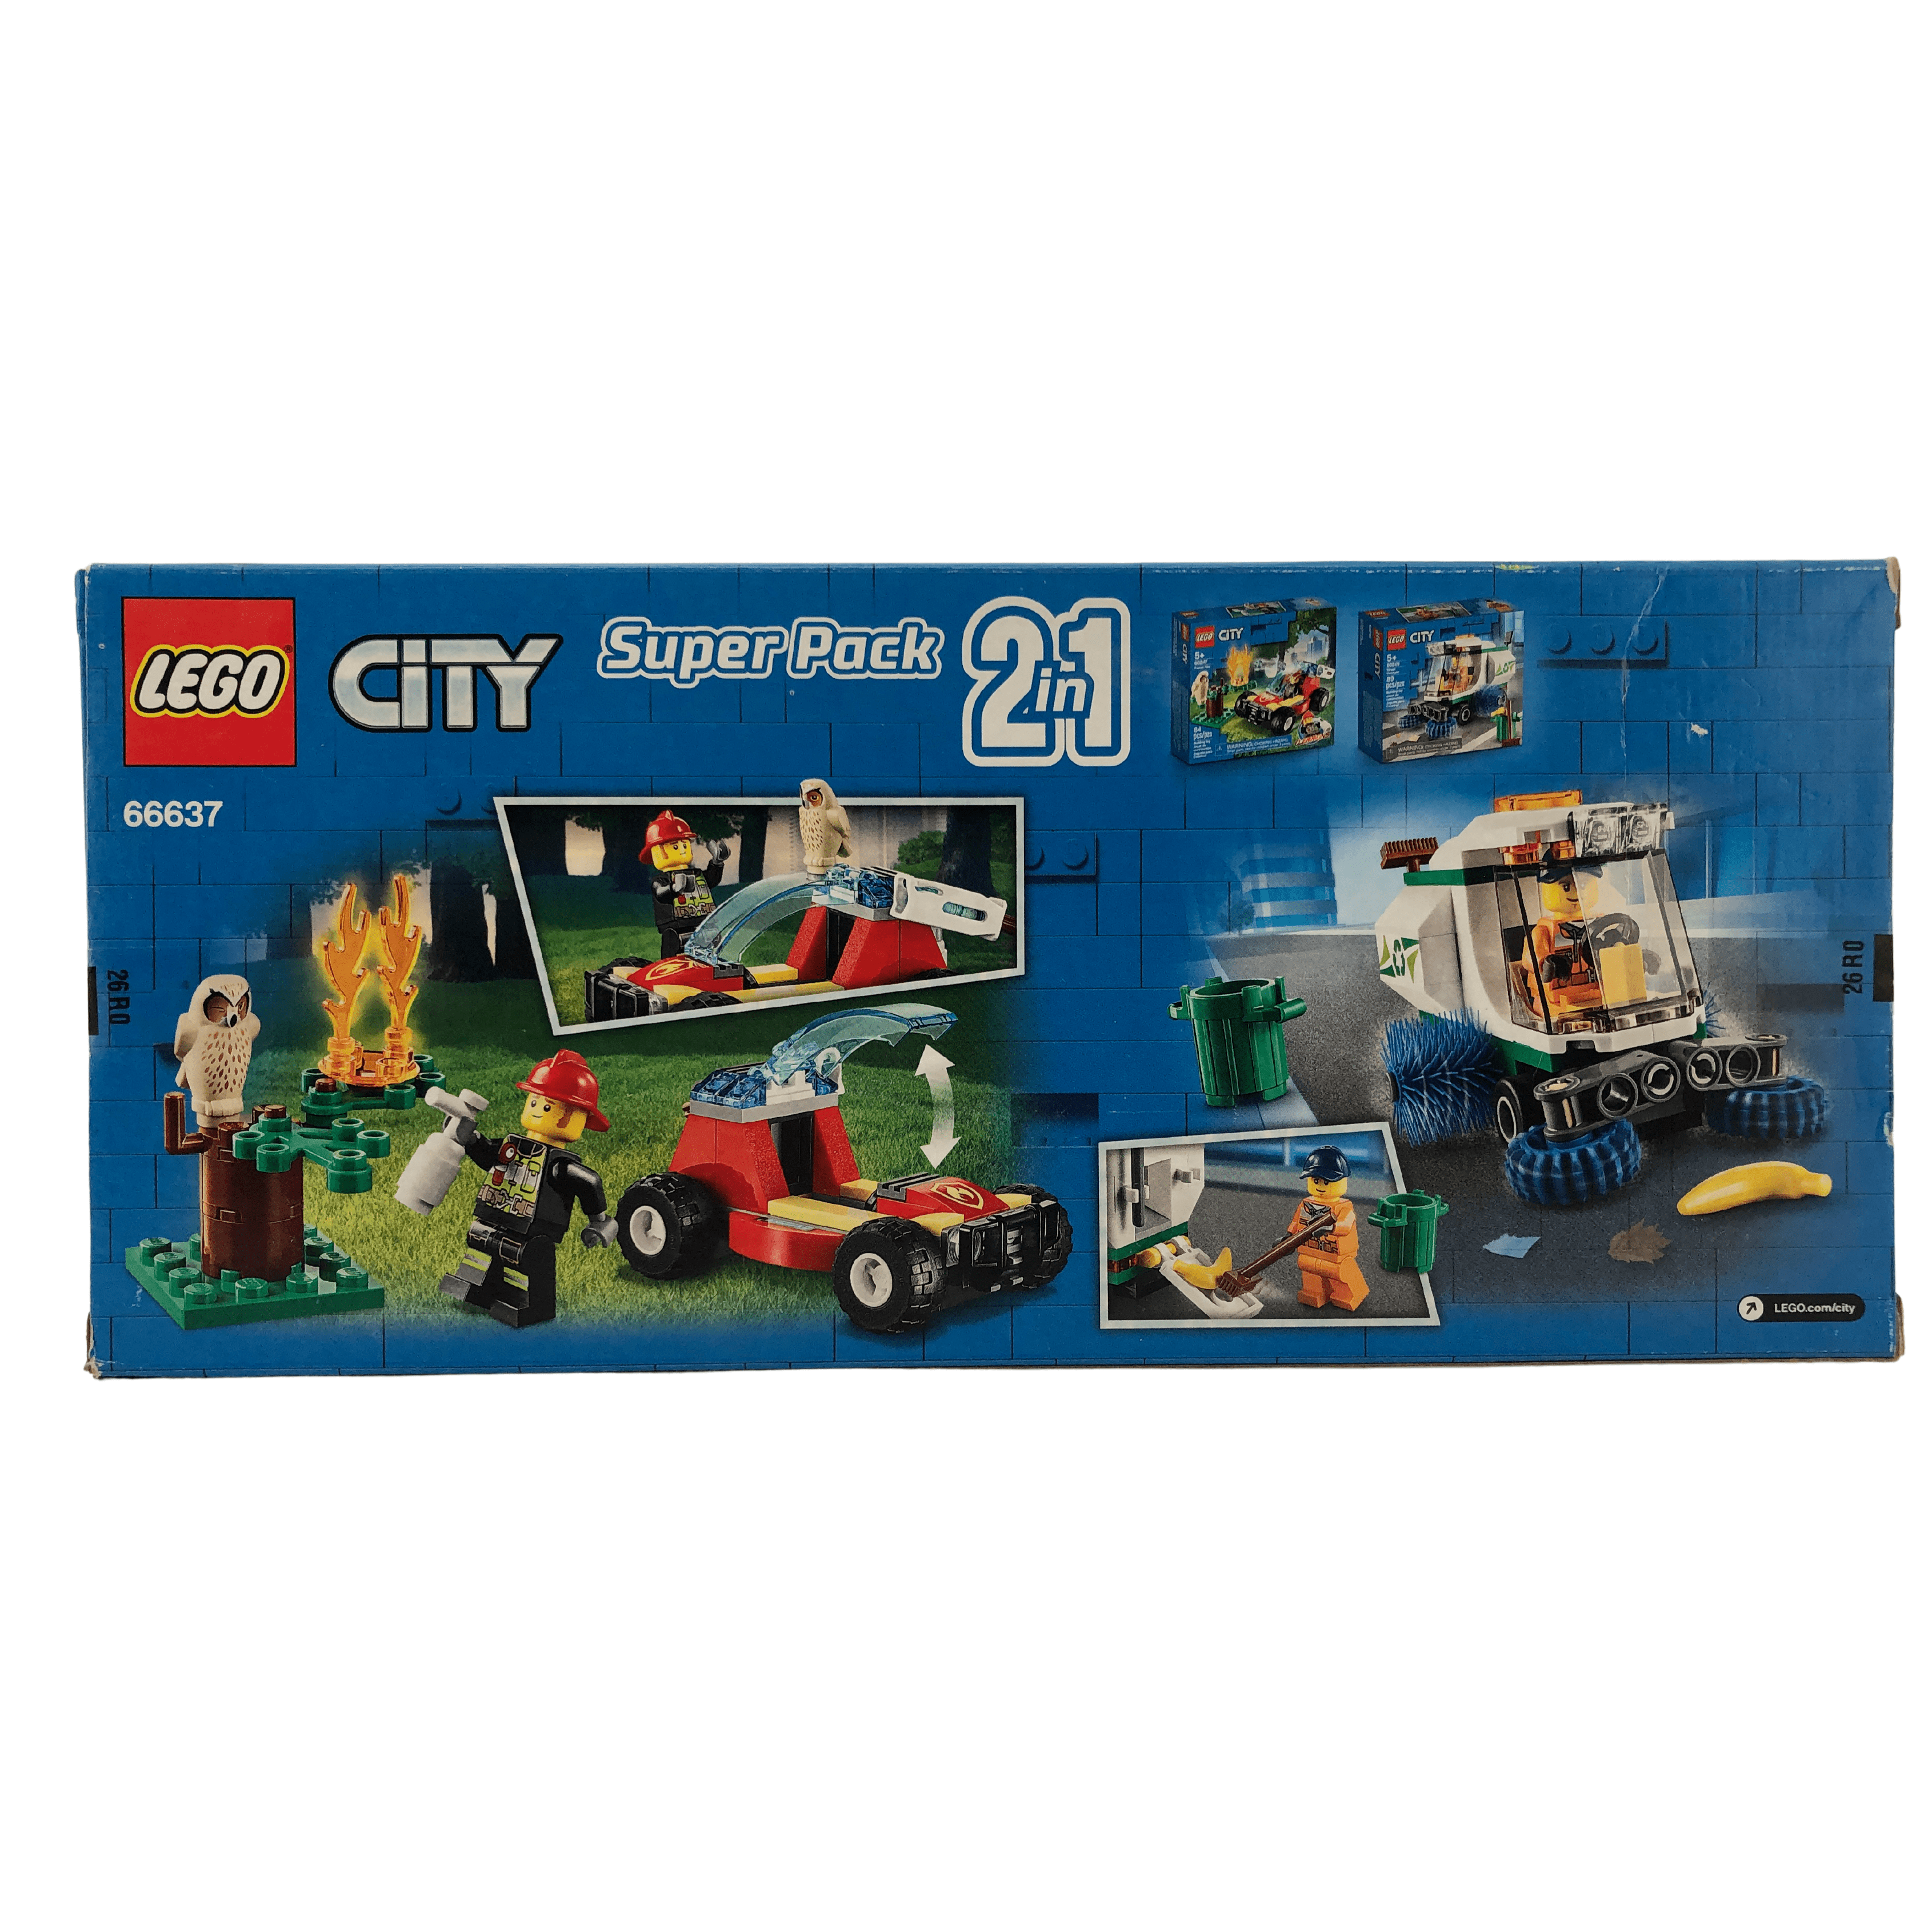 Lego City Super Pack 2-in-1: Fire Car & Street Sweeper: 173 Pieces **DEALS**